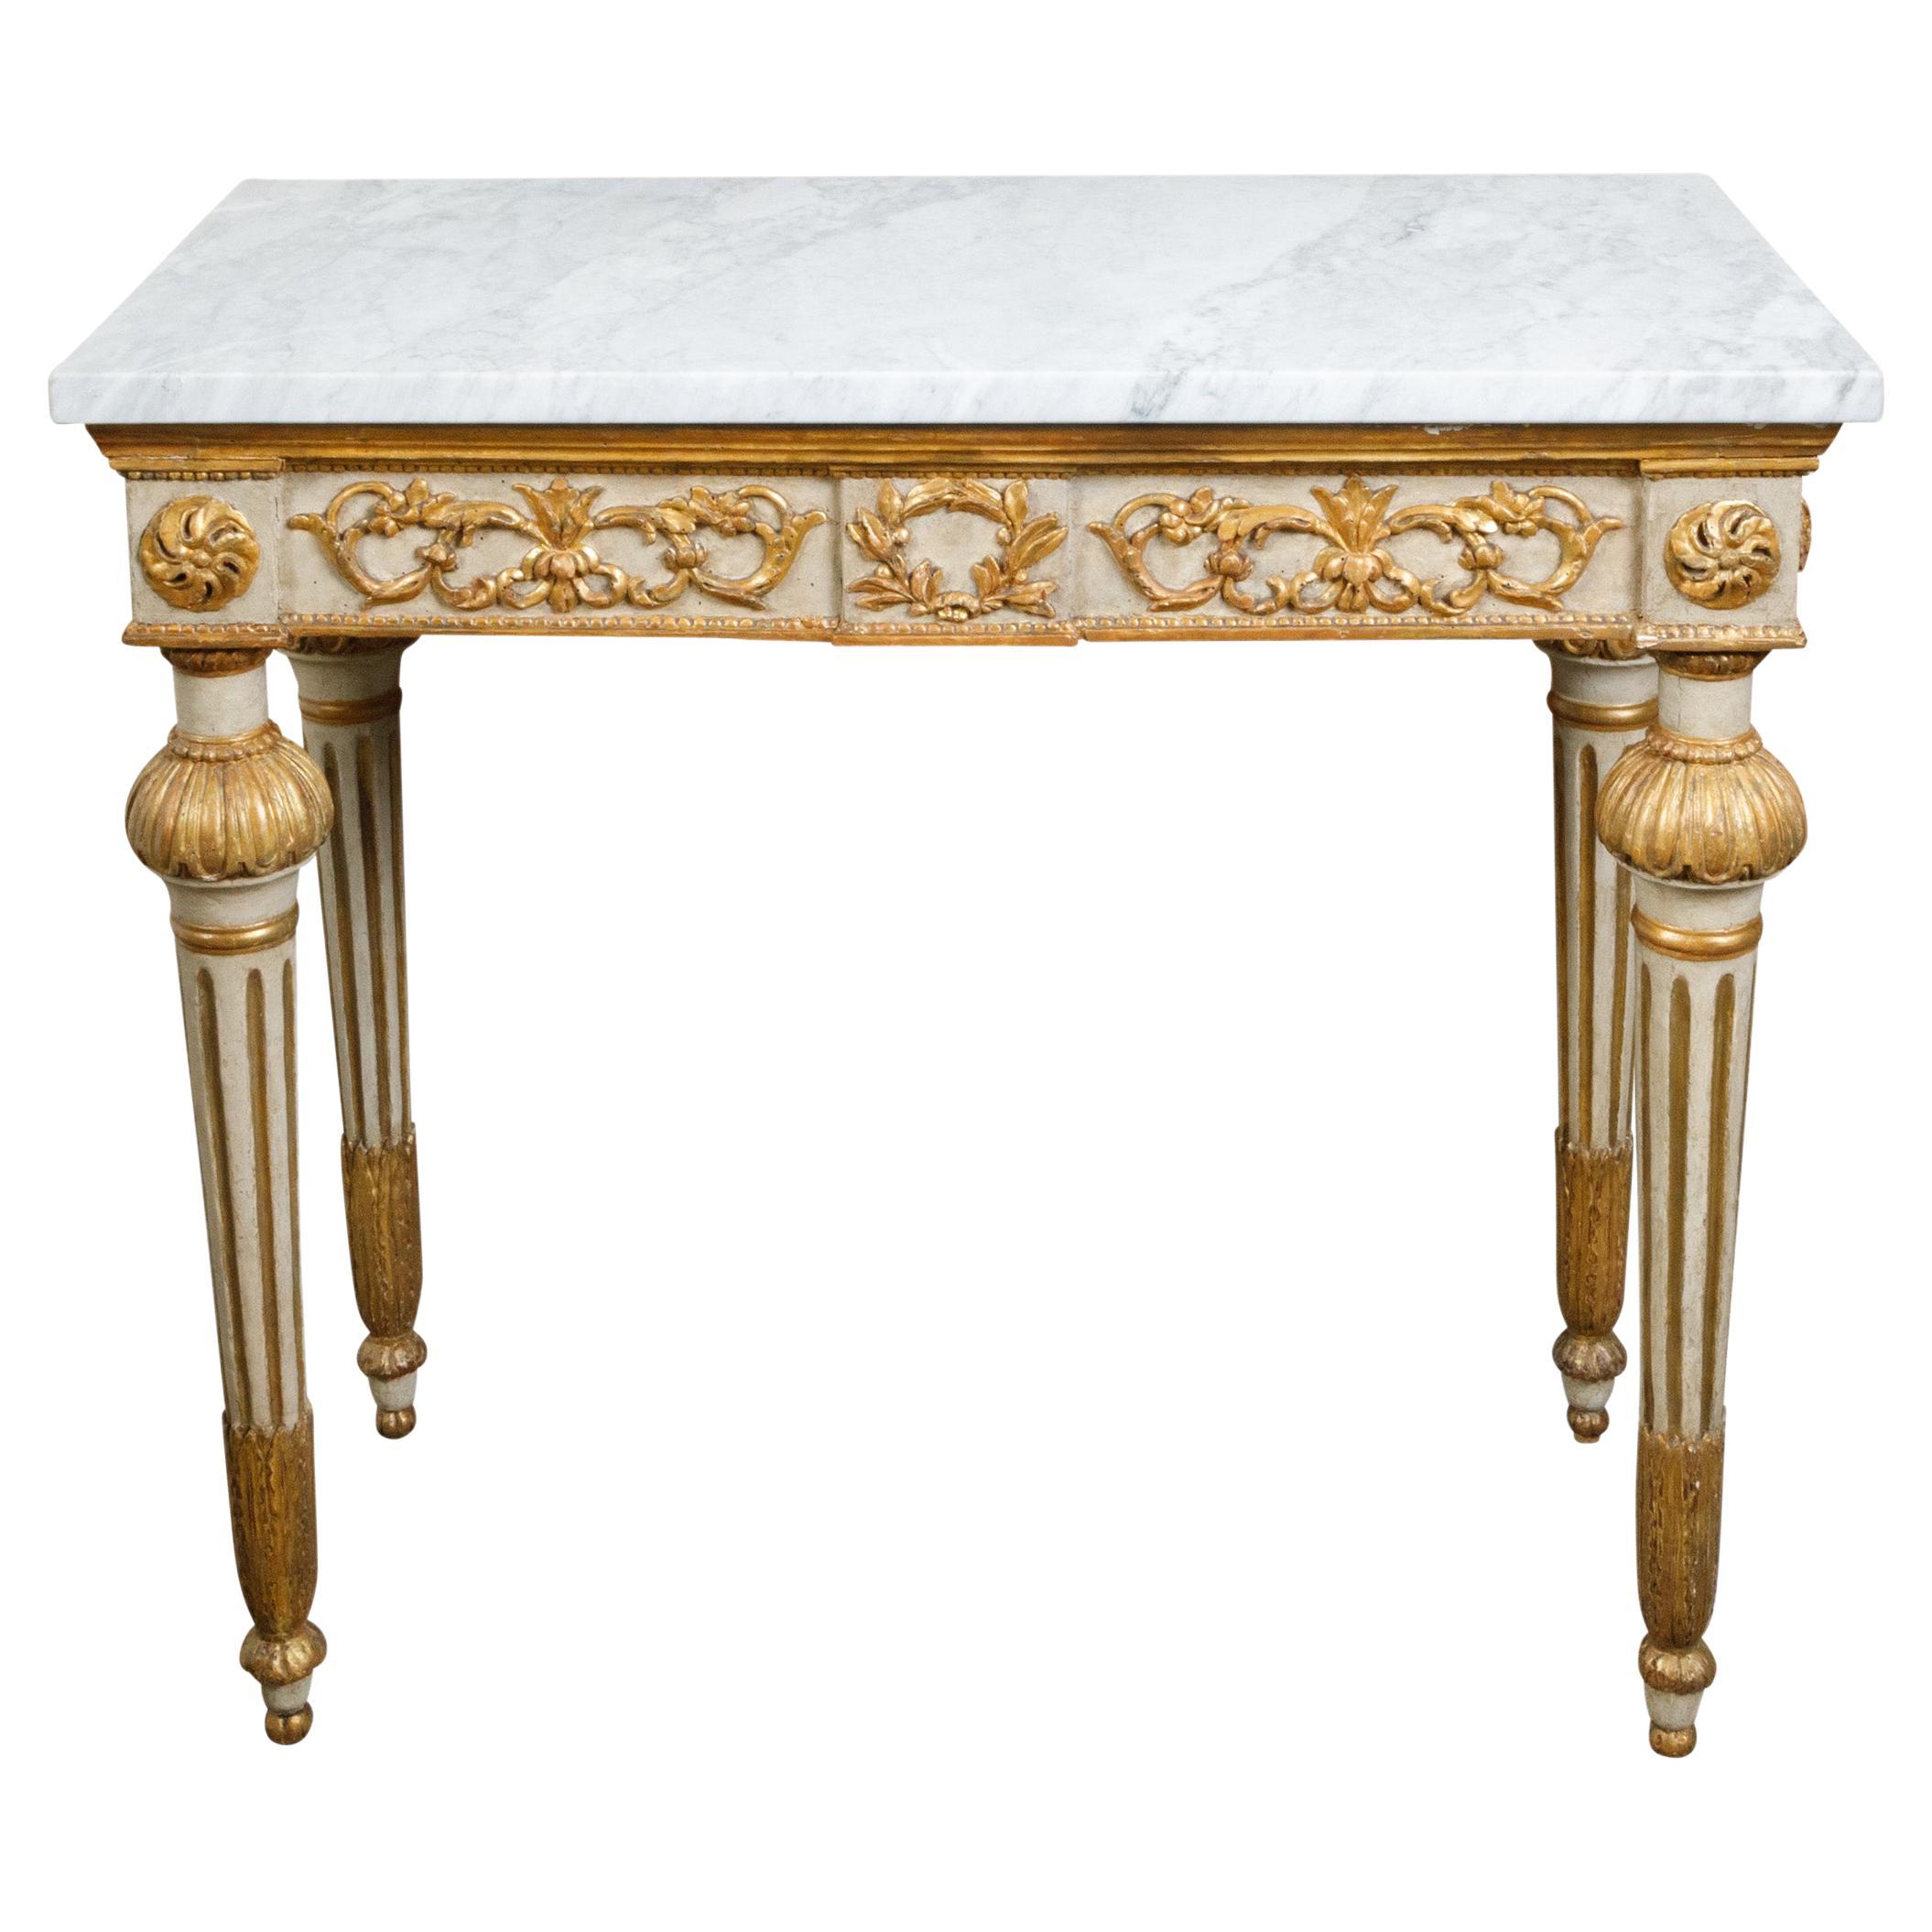 Italian 18th Century Neoclassical Carved and Gilt Console Table with Marble Top